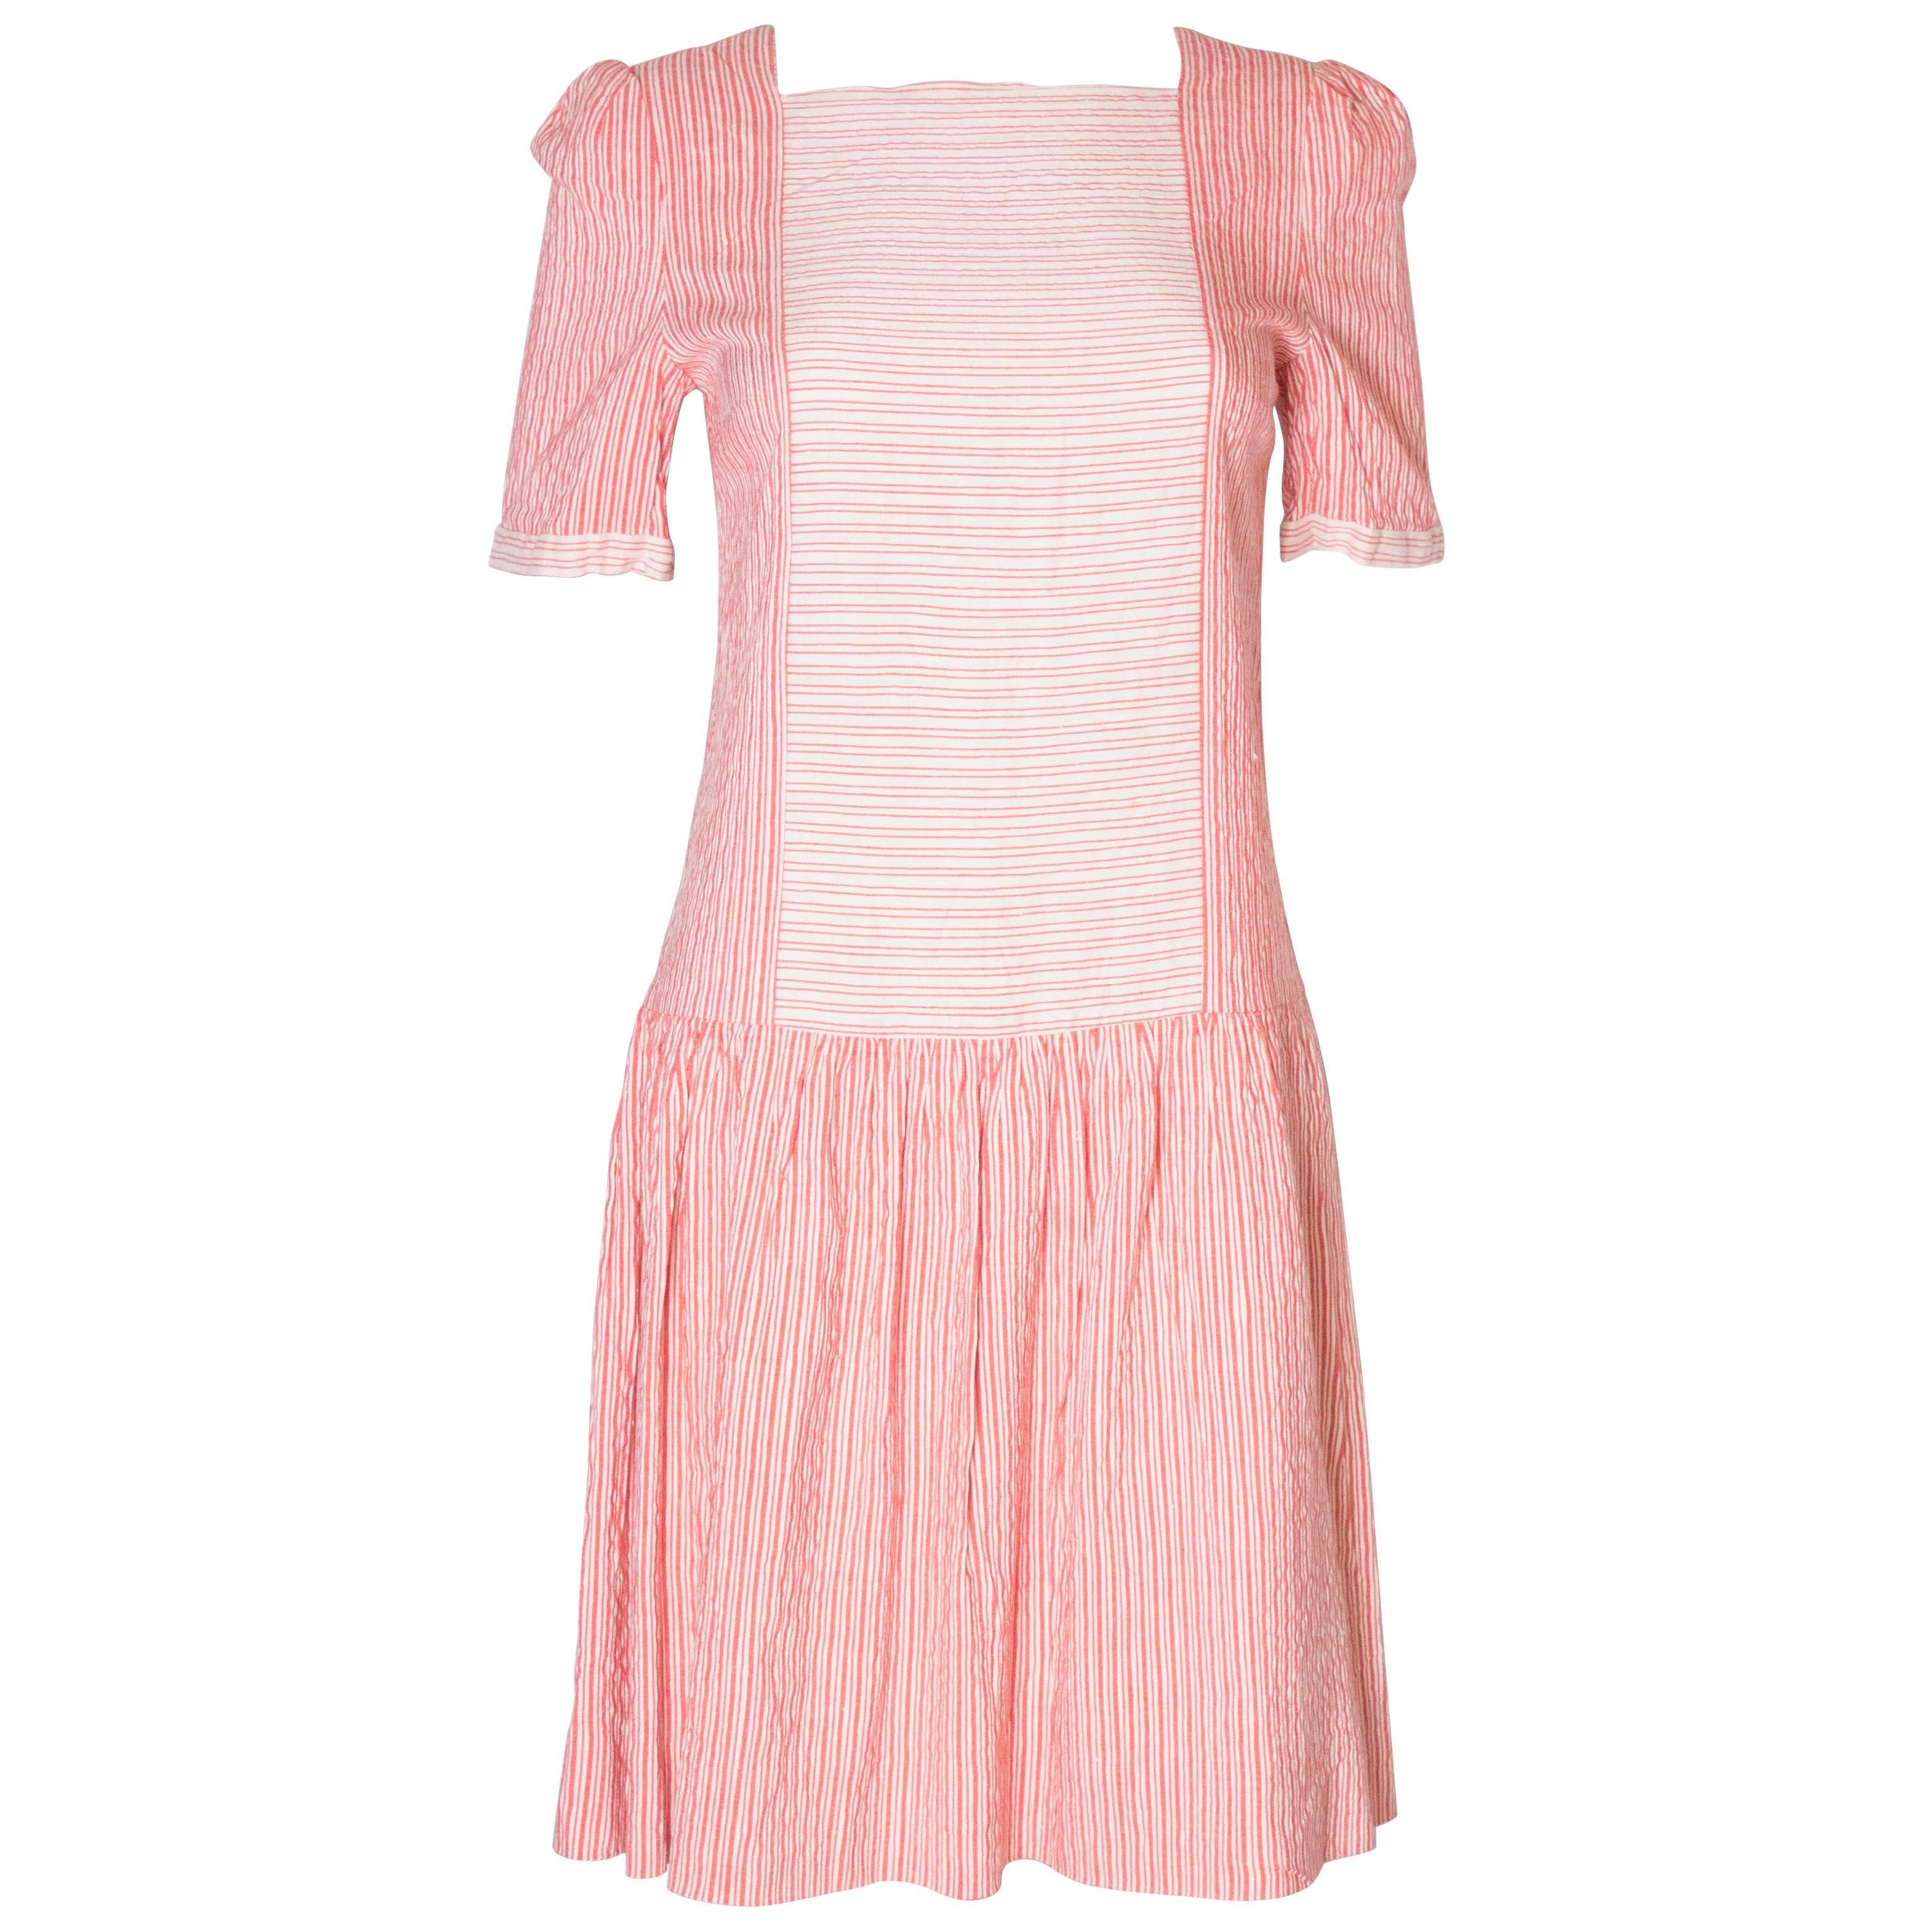 A Vintage 1990s stripe cotton summer day dress by Gina Fratini  For Sale